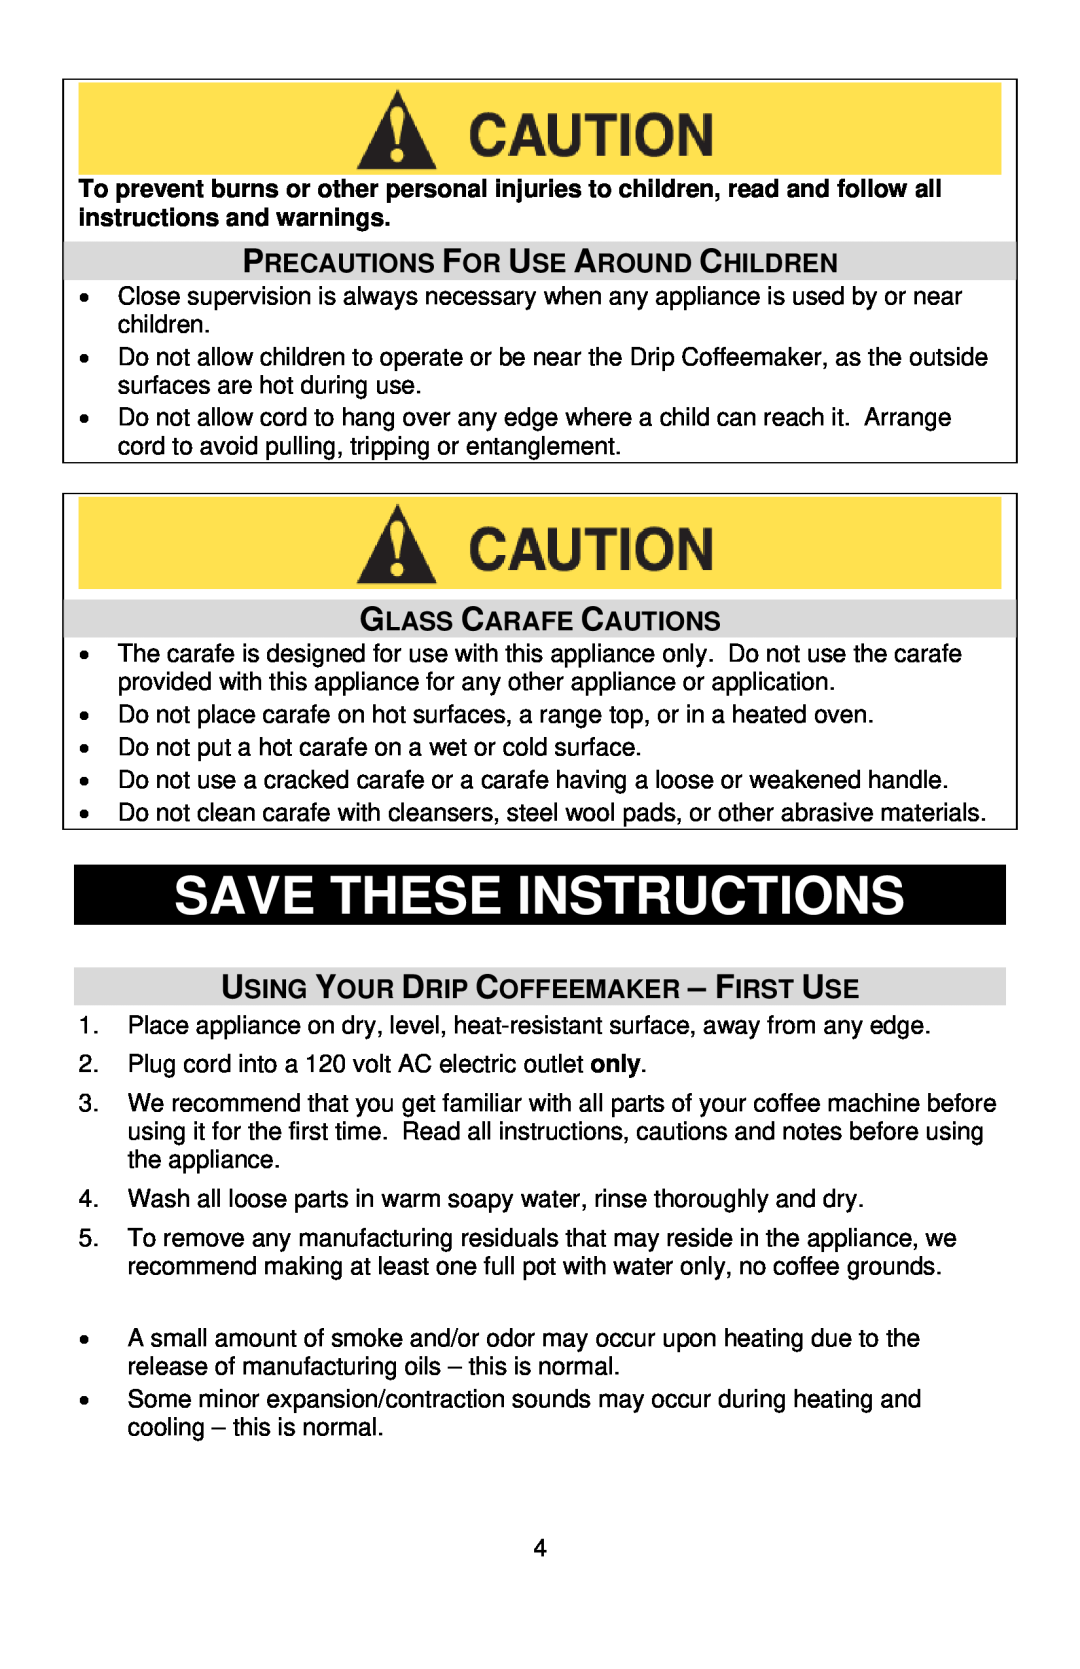 West Bend Auto-off Coffeemaker Save These Instructions, Precautions For Use Around Children, Glass Carafe Cautions 